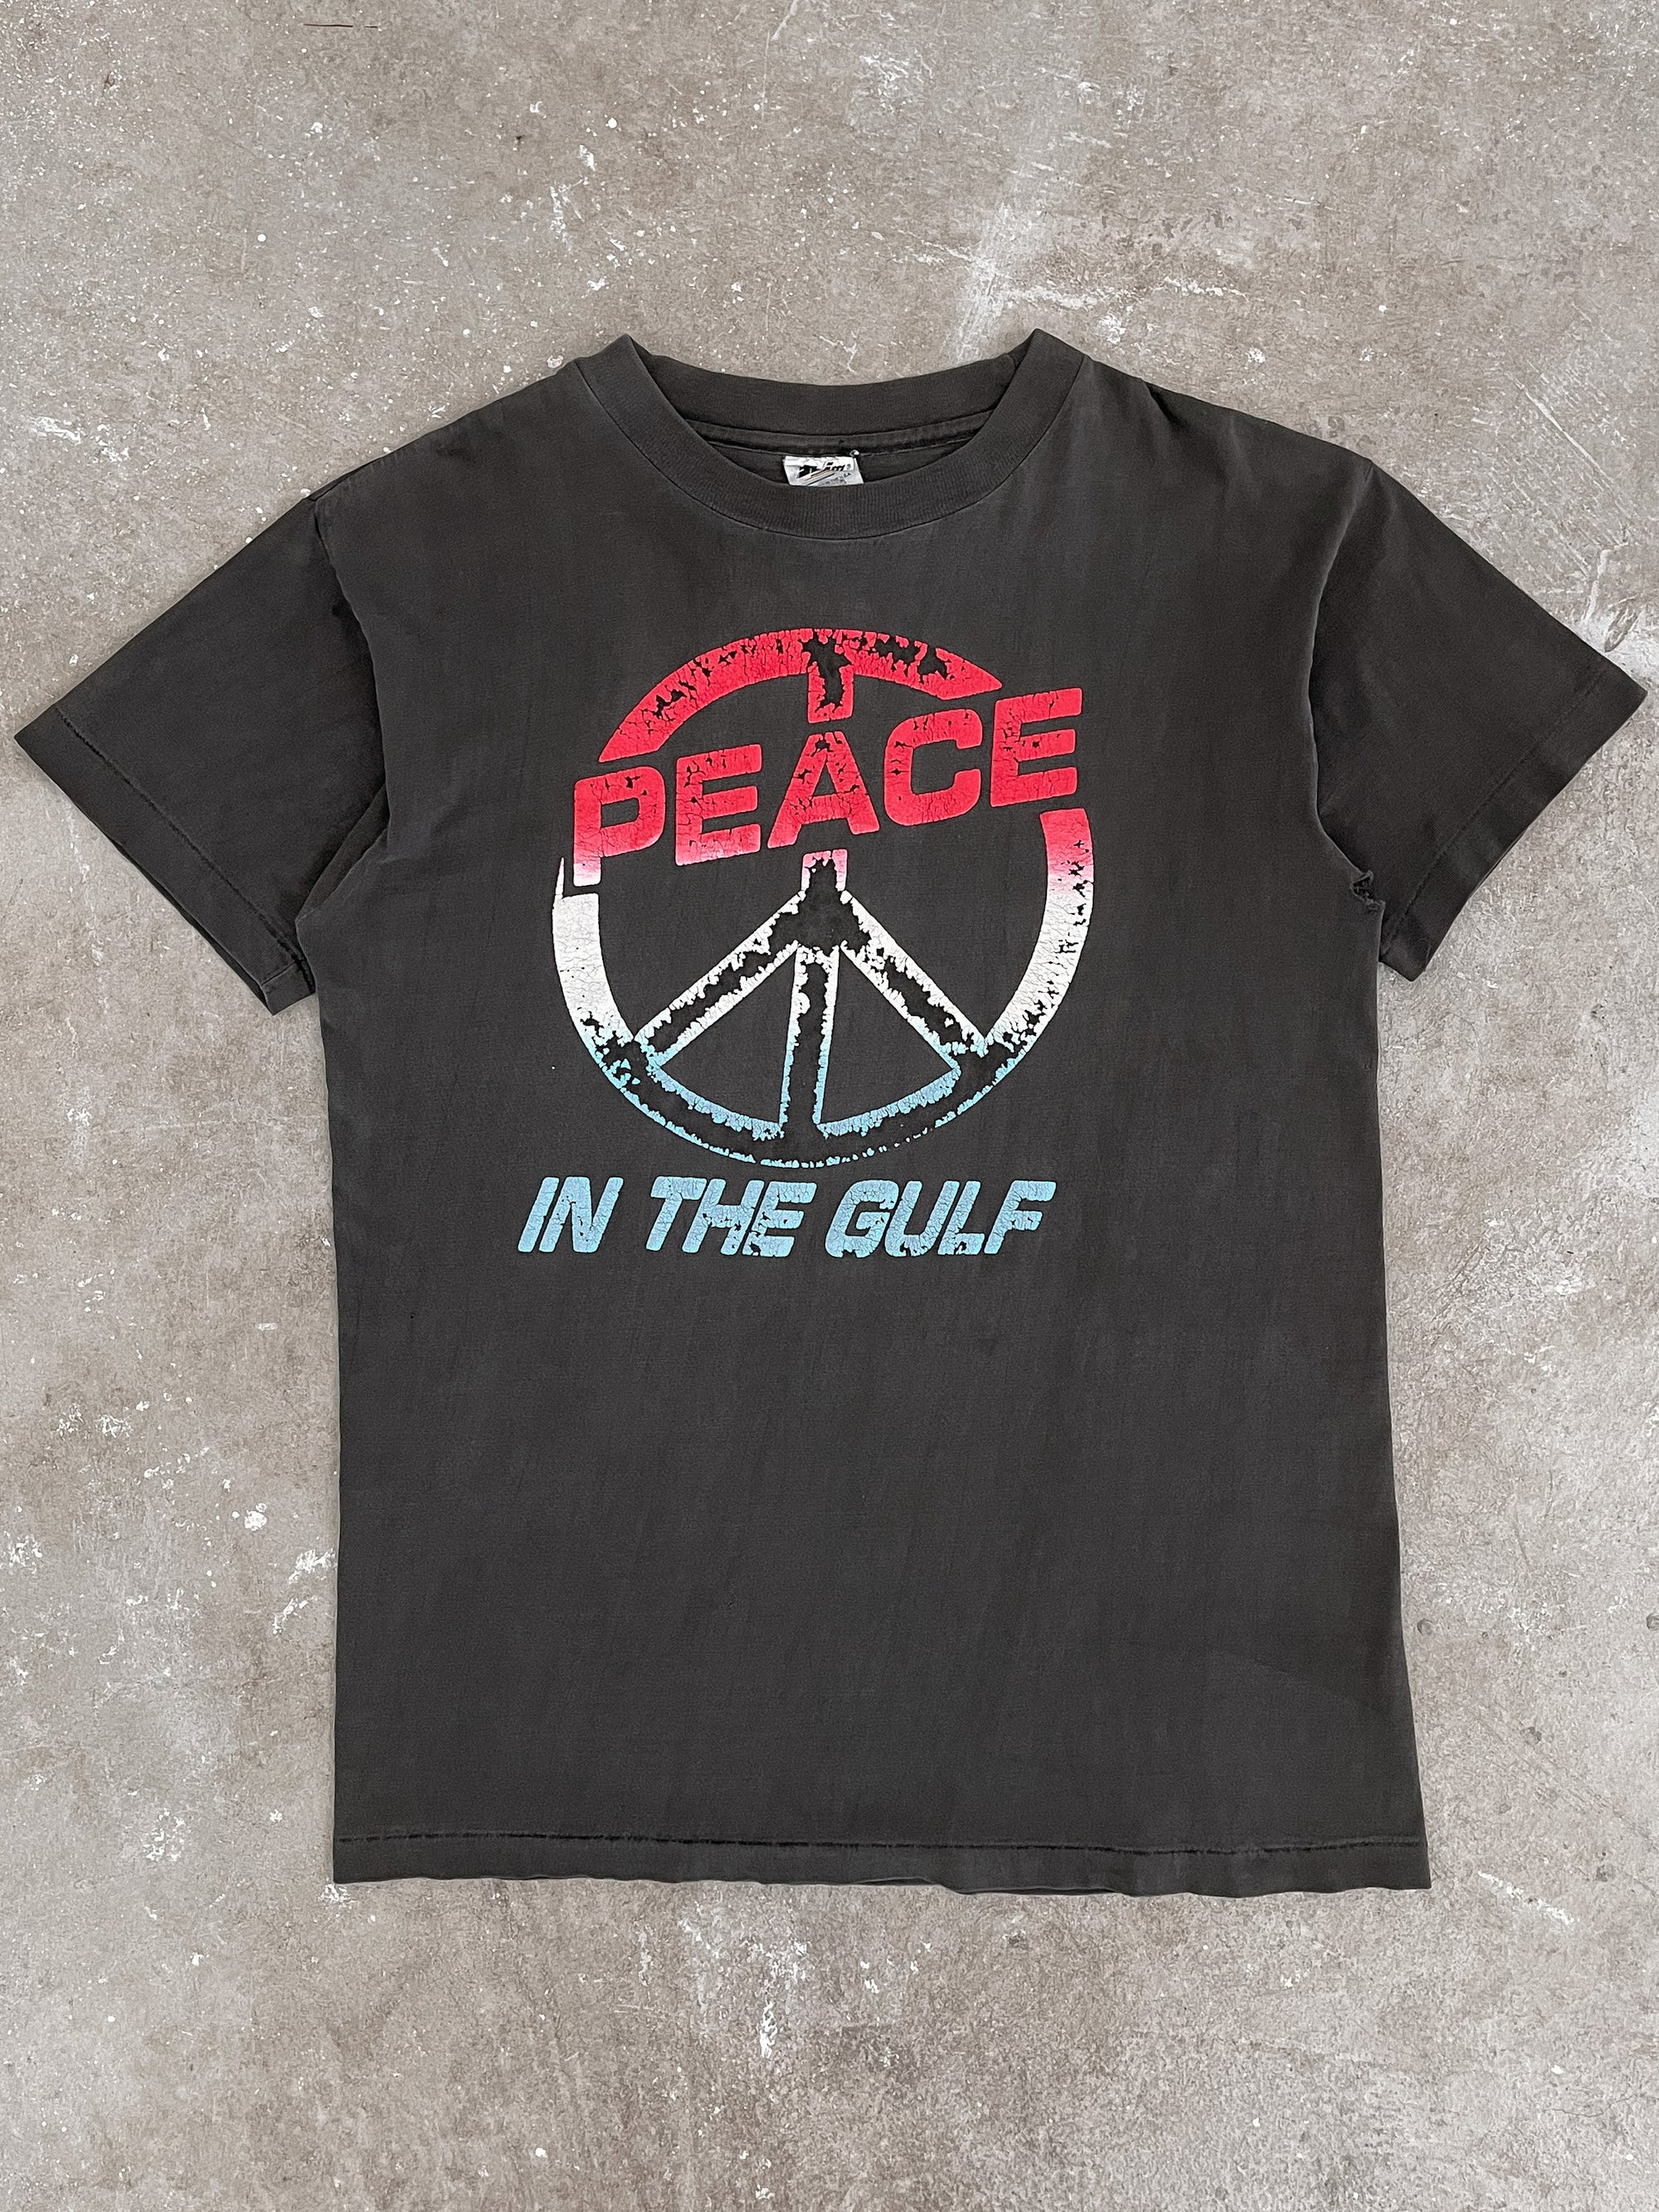 1980s/90s “Peace In The Gulf” Faded Puff Print Single Stitched Tee (M/L)